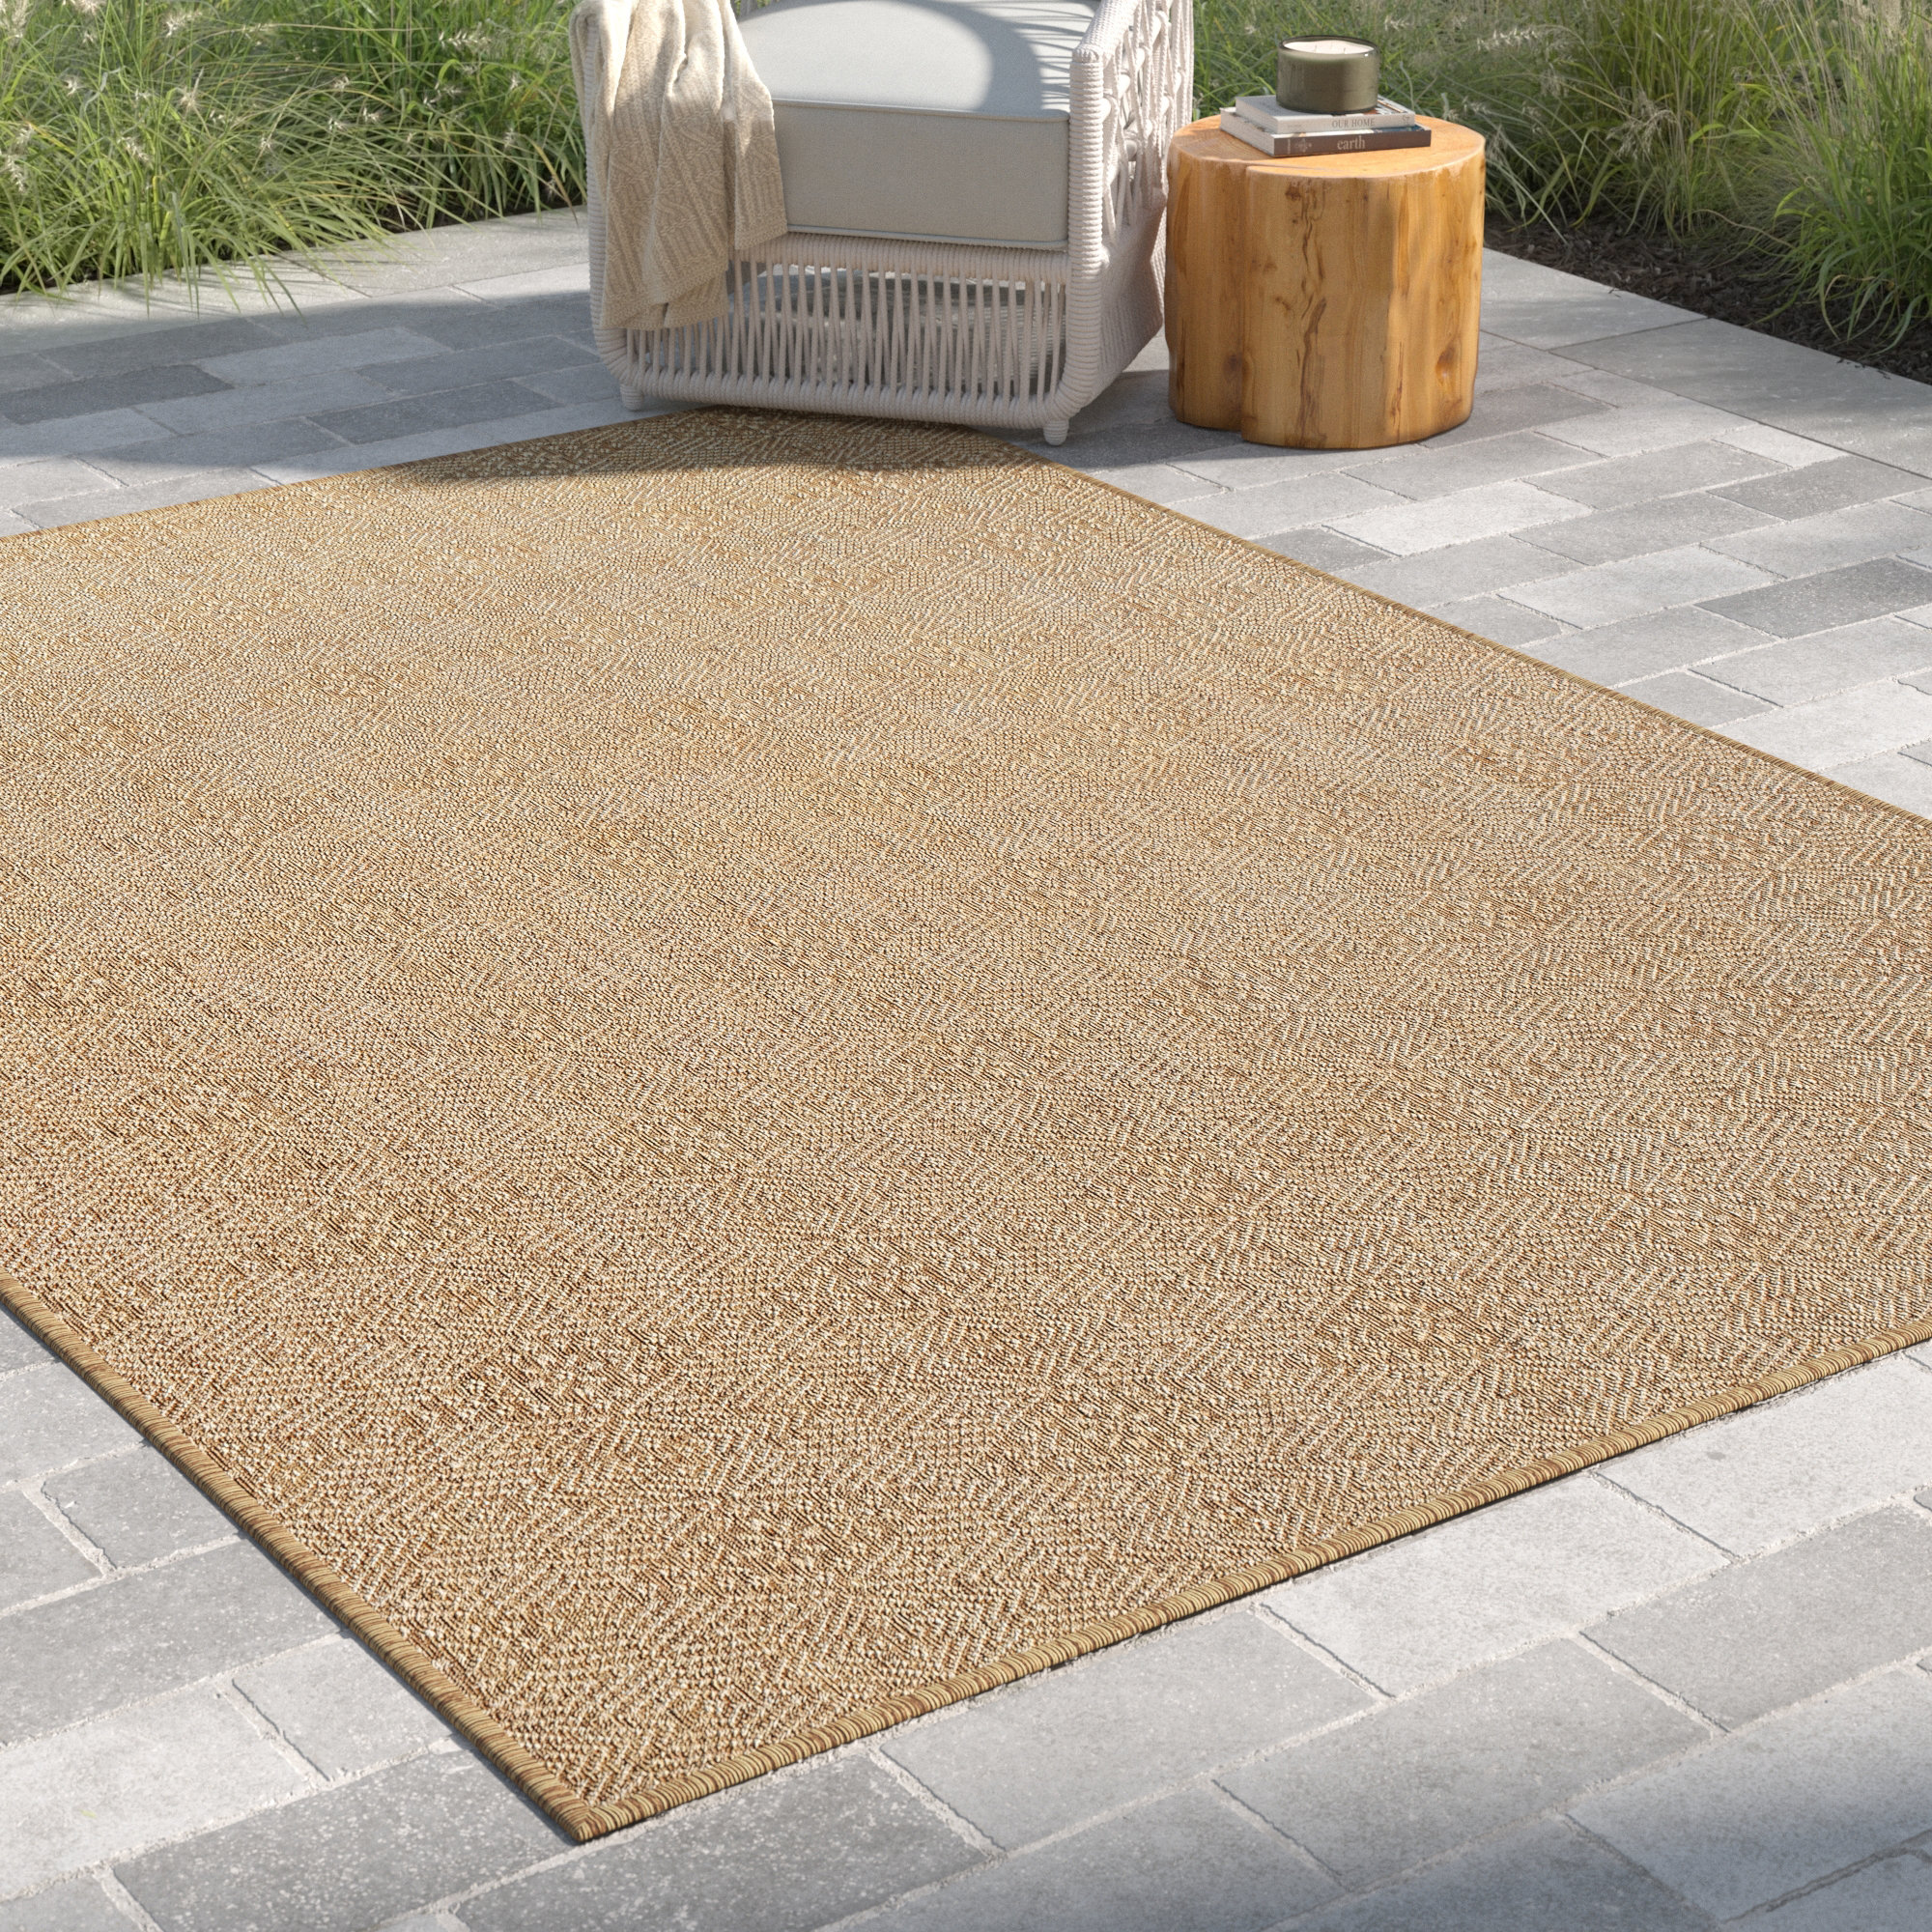 Roselyn Geometric Power Loom Beige Indoor/Outdoor Patio Rug Sand & Stable Rug Size: Rectangle 5' x 8